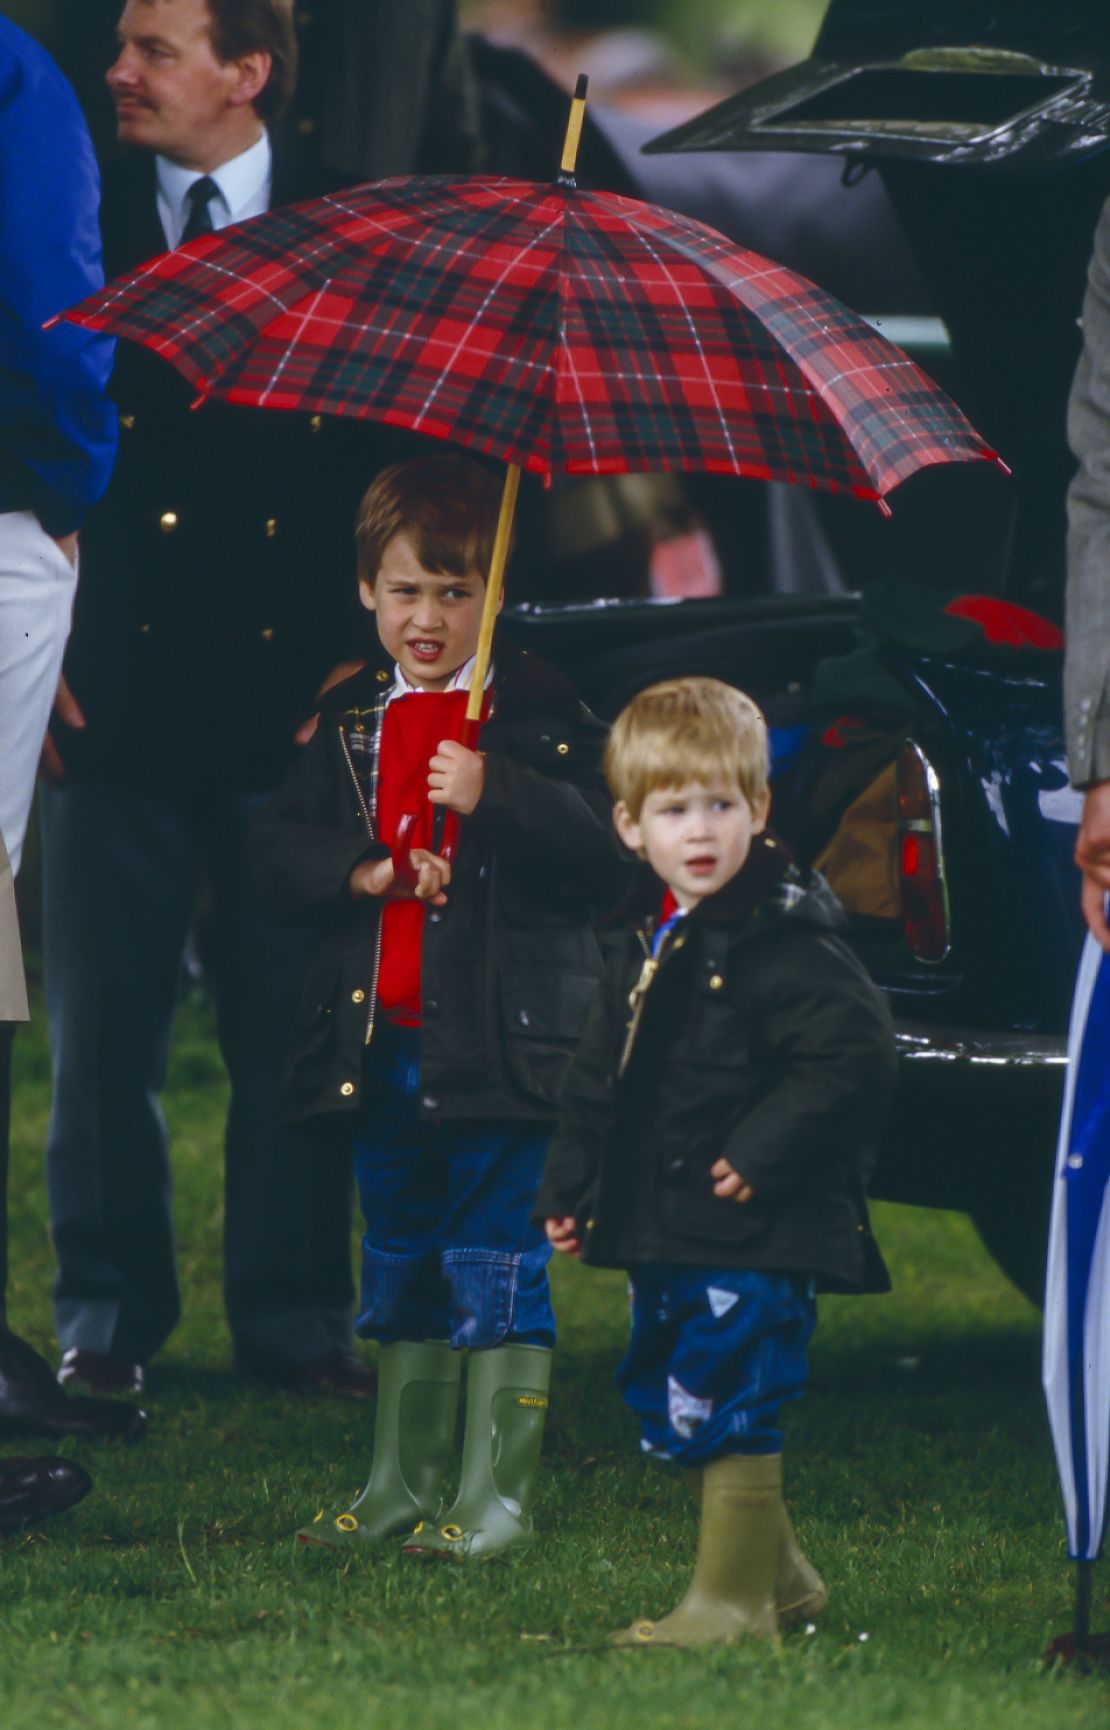 Prince William and Prince Harry famously wore Wellipets to watch Prince Charles play Polo at Cirencester Polo Club  on June 6, 1987, in Windsor.